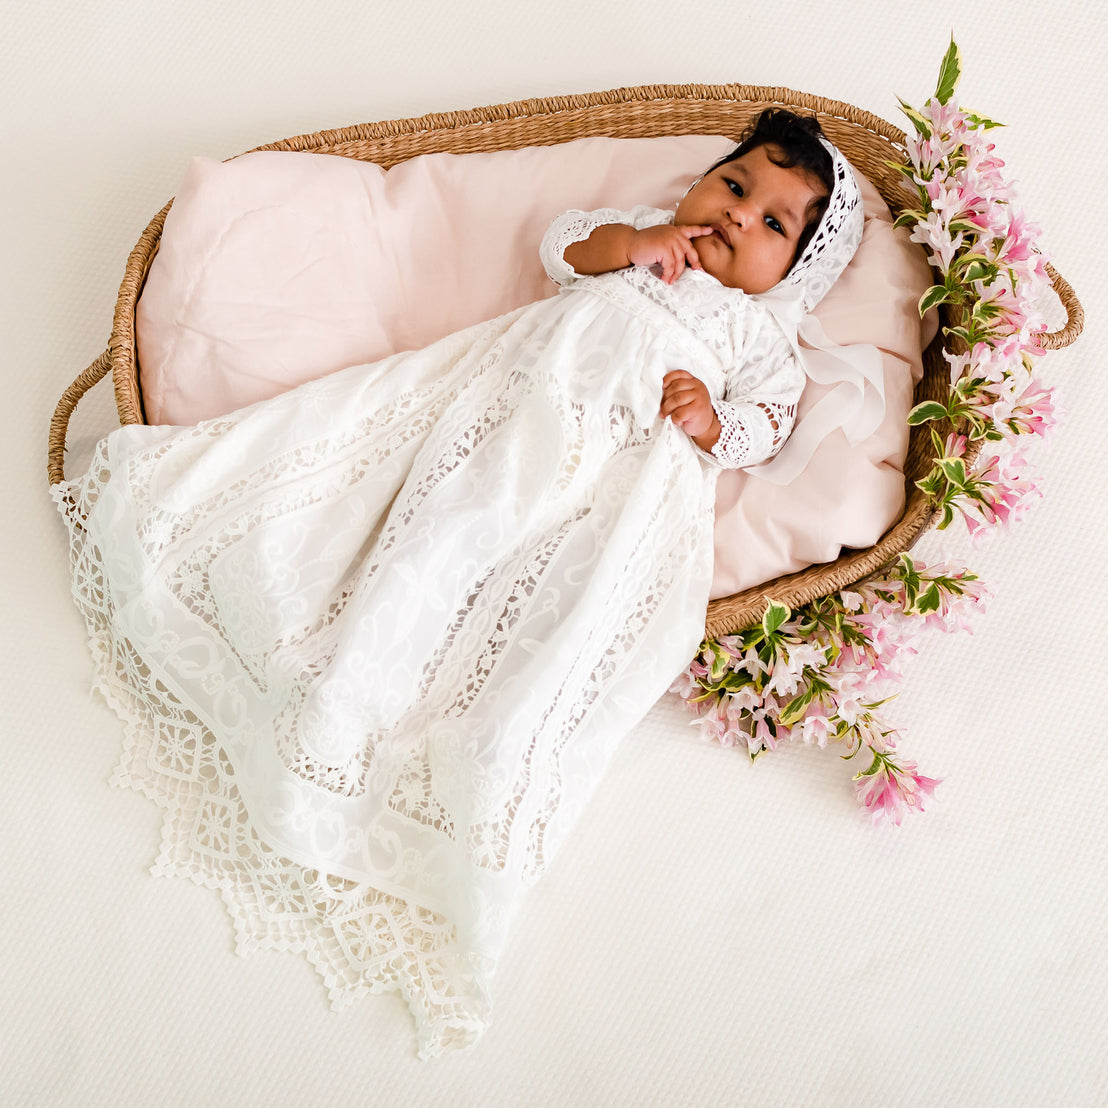 A newborn baby wearing the Adeline Newborn Lace Dress lies in an upscale wicker basket with a pink blanket, surrounded by traditional pink flowers, looking up.